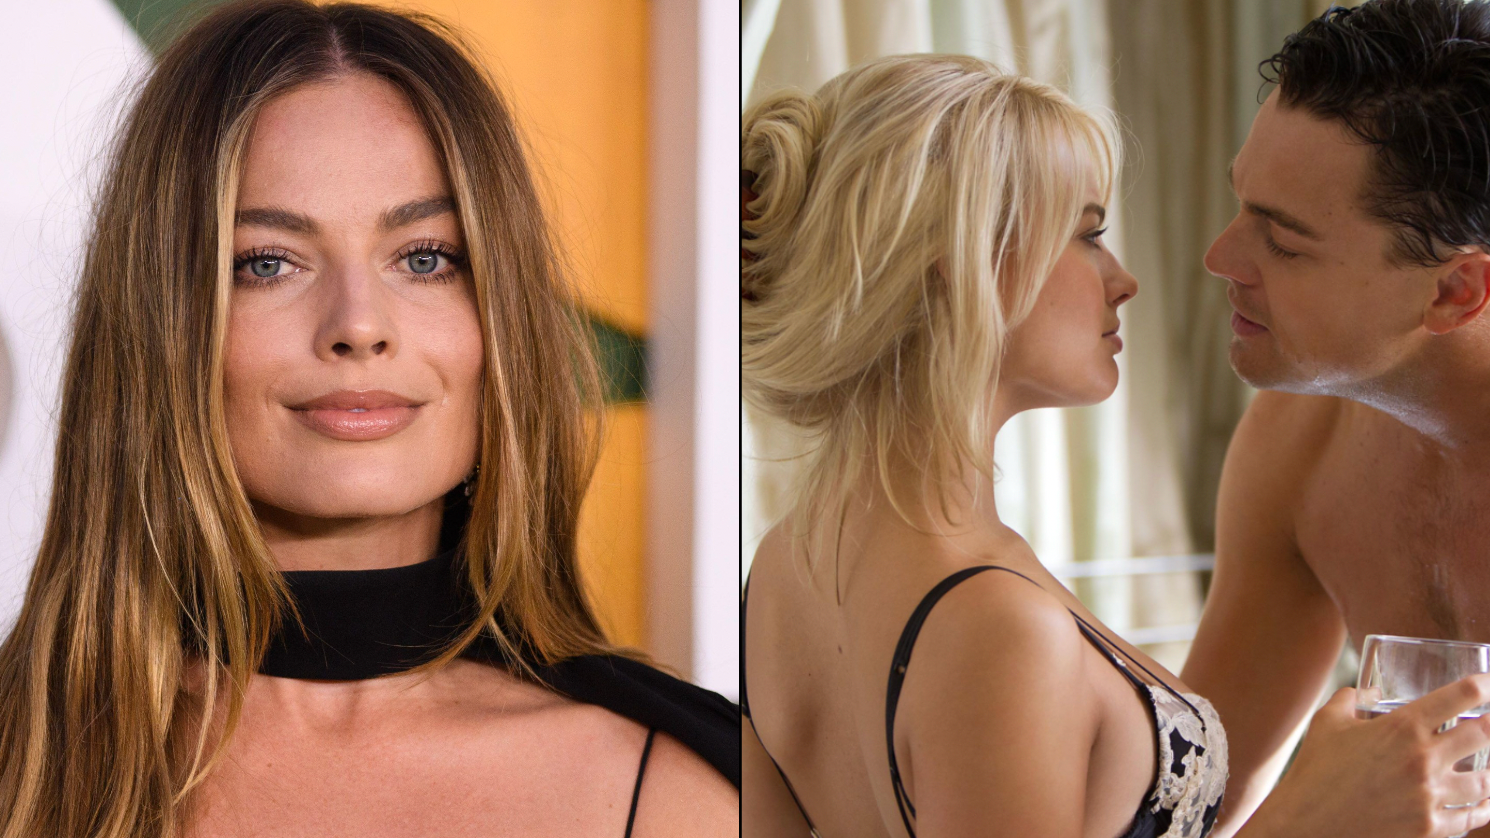 Margot Robbie addresses how real breasts and pubic hair are filmed during sex scenes pic